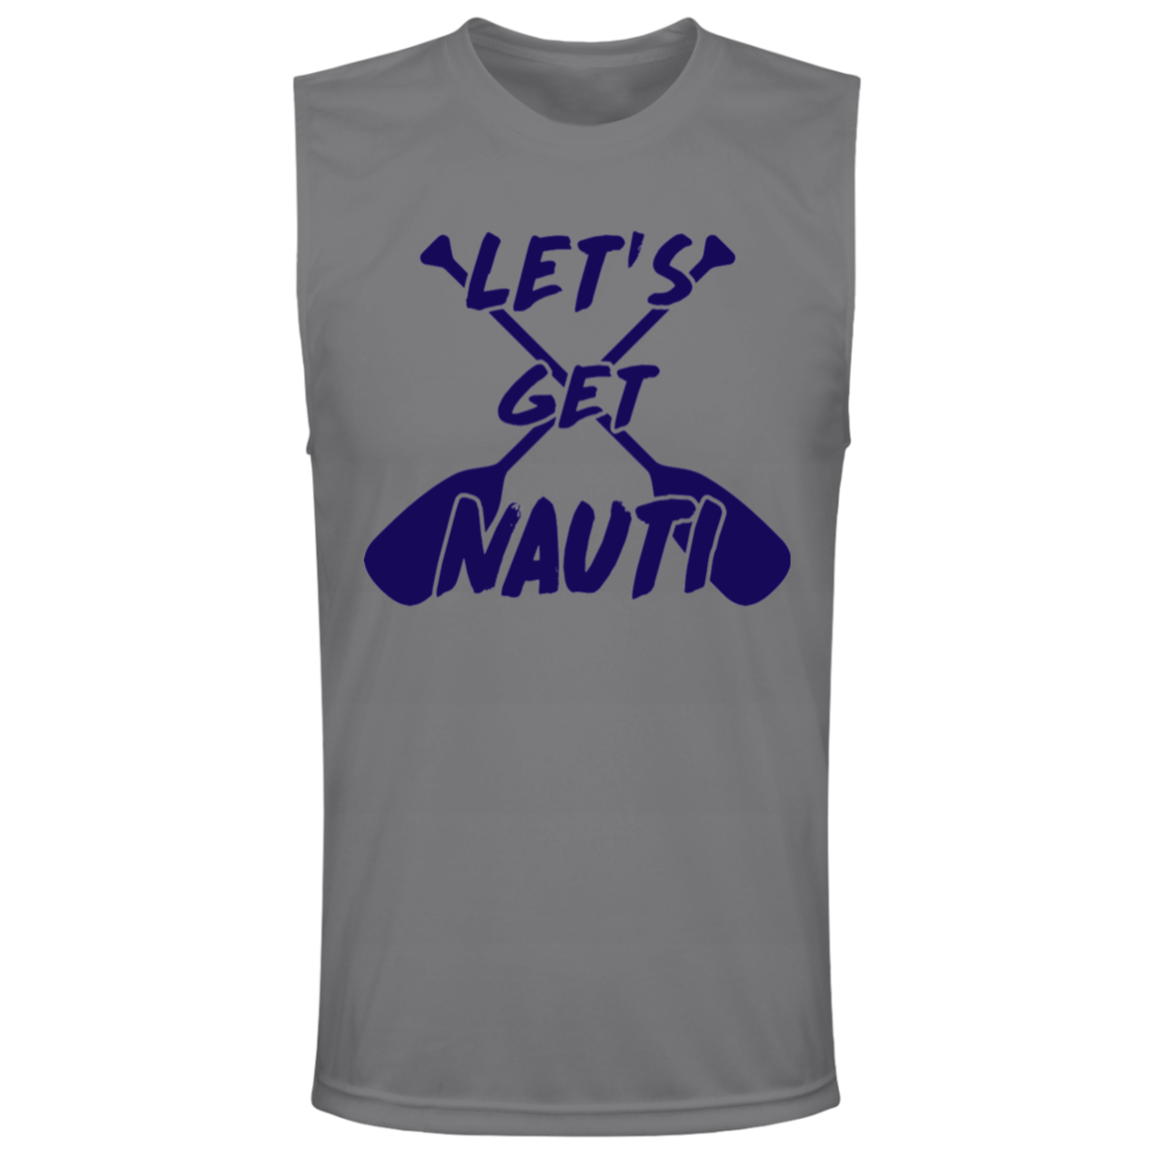 ***2 SIDED***  HRCL FL - Navy Lets Get Nauti - - 2 Sided - UV 40+ Protection TT11M Team 365 Mens Zone Muscle Tee